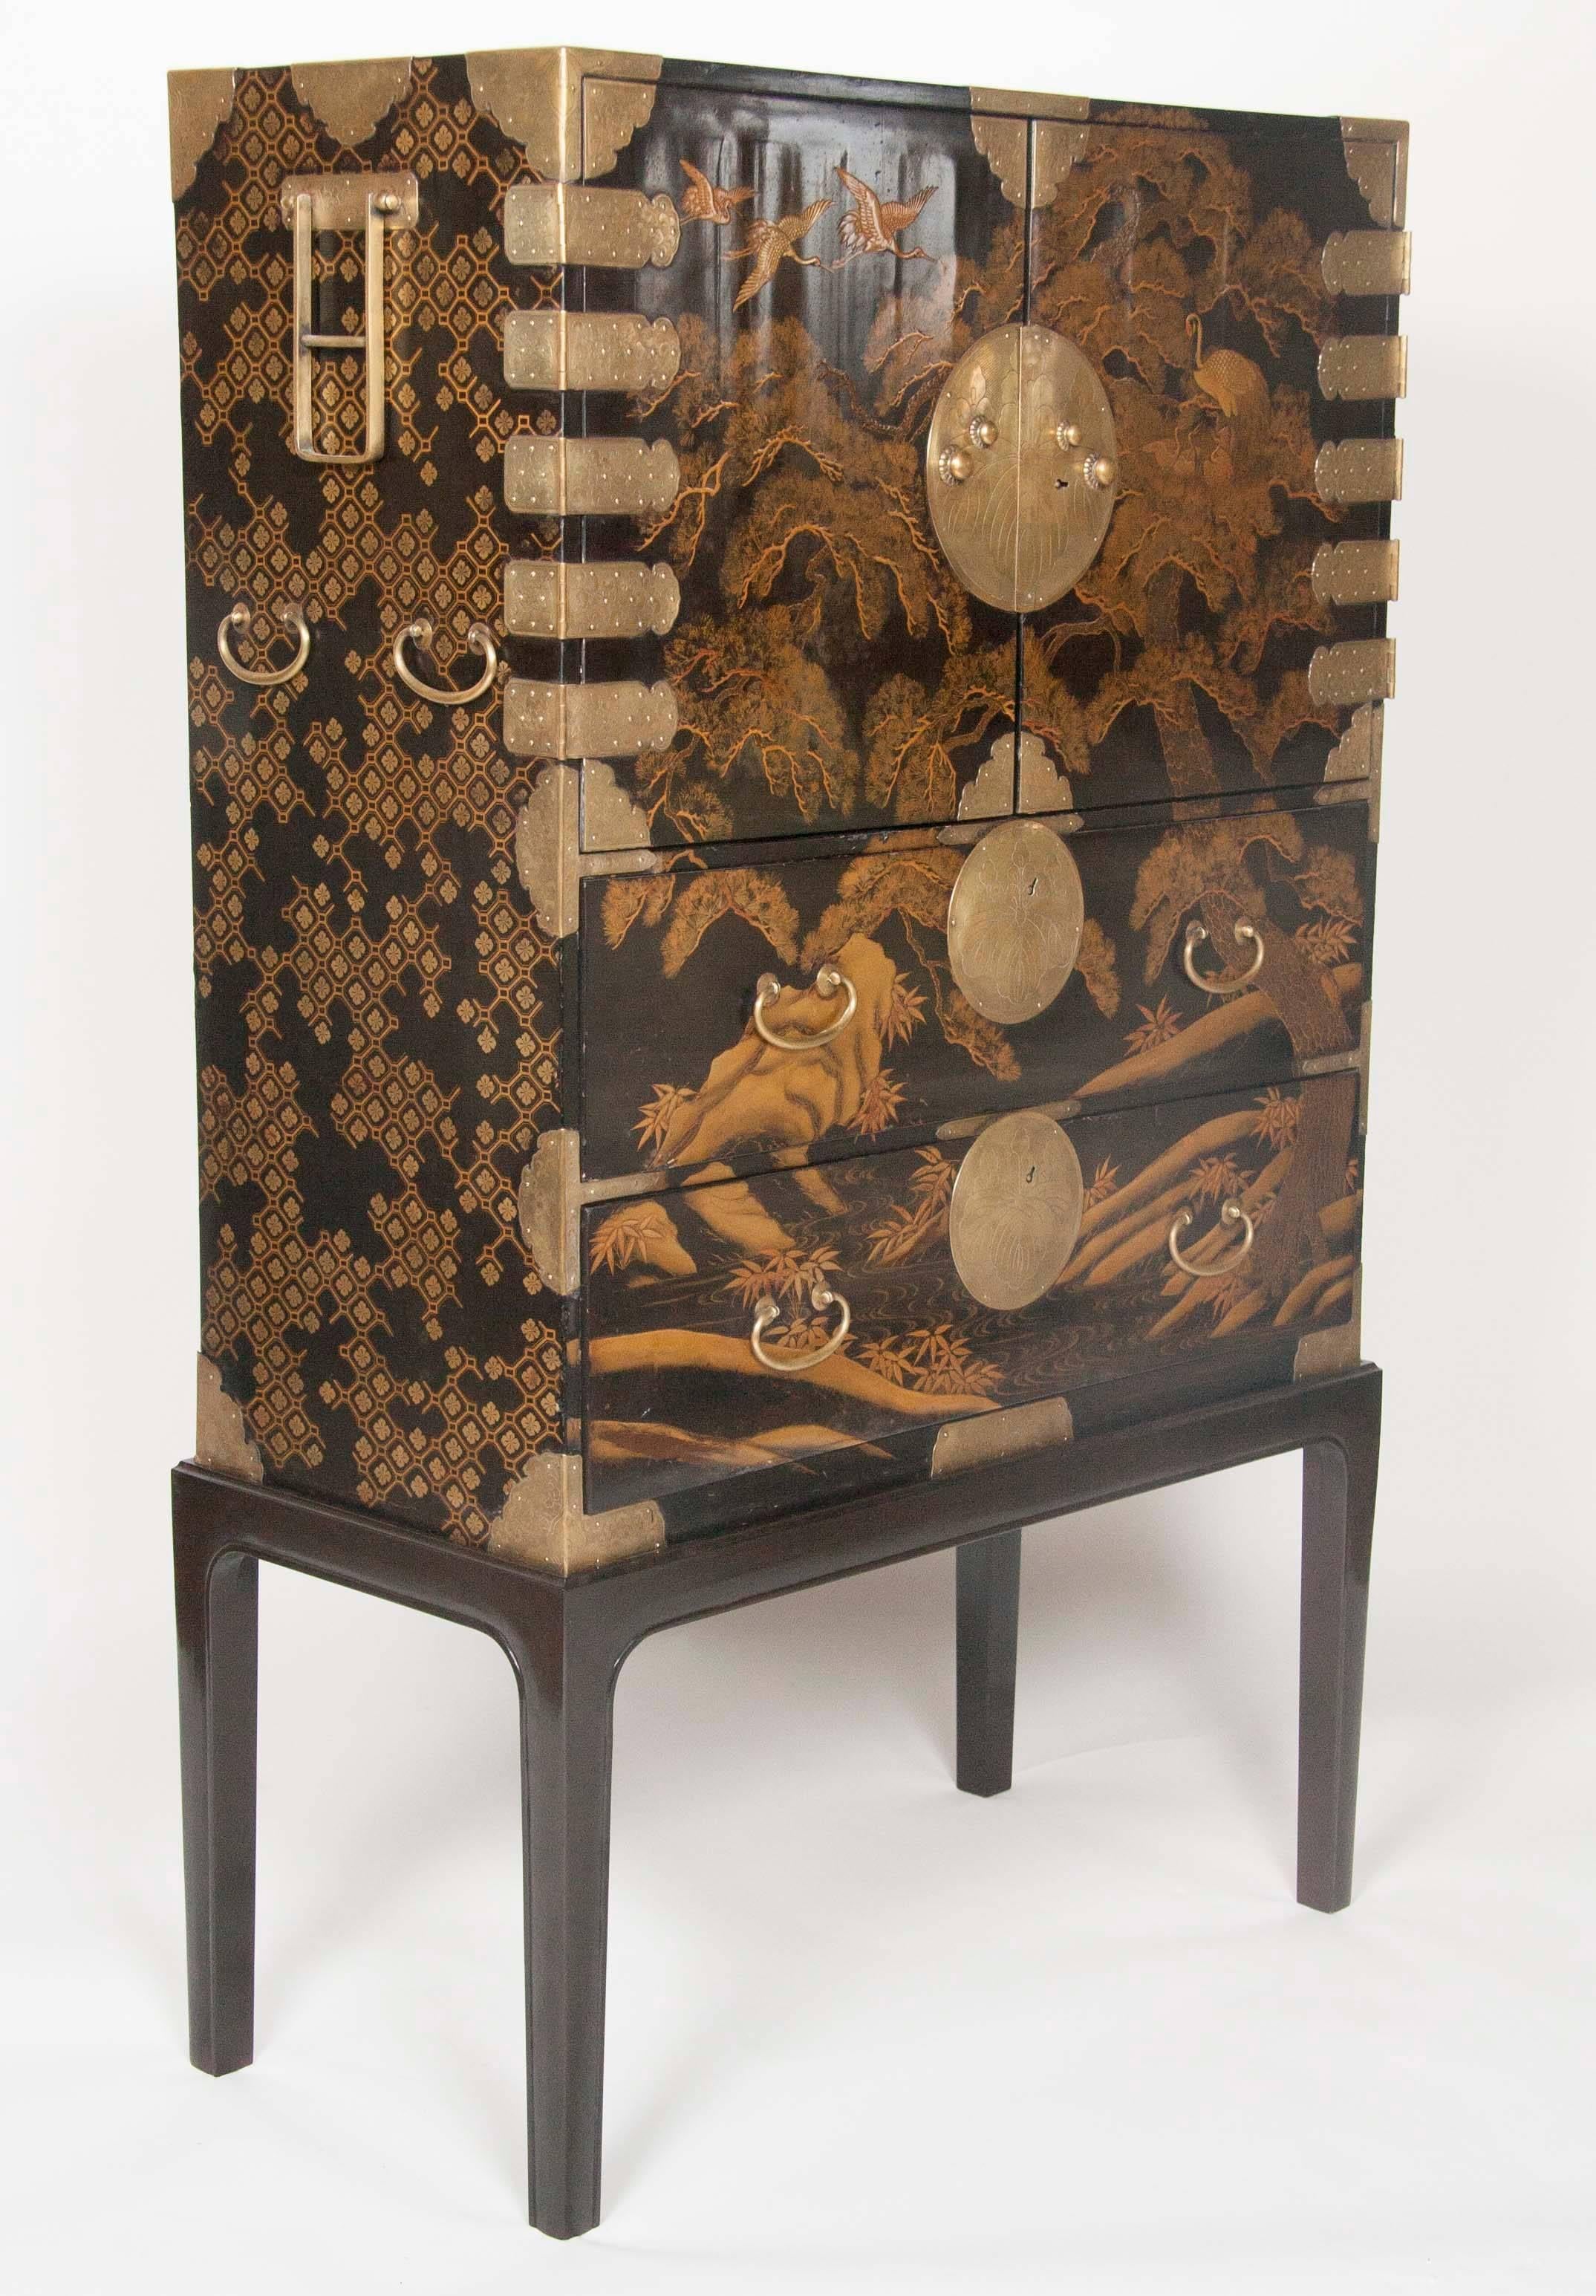 A striking early 19th century Japanese gilt and black lacquer cabinet with brass mountings; two upper doors; revealing three highly decorated lacquered Kimono trays over three ebonized Kimono trays. Two lower drawers showing cranes in pine trees.